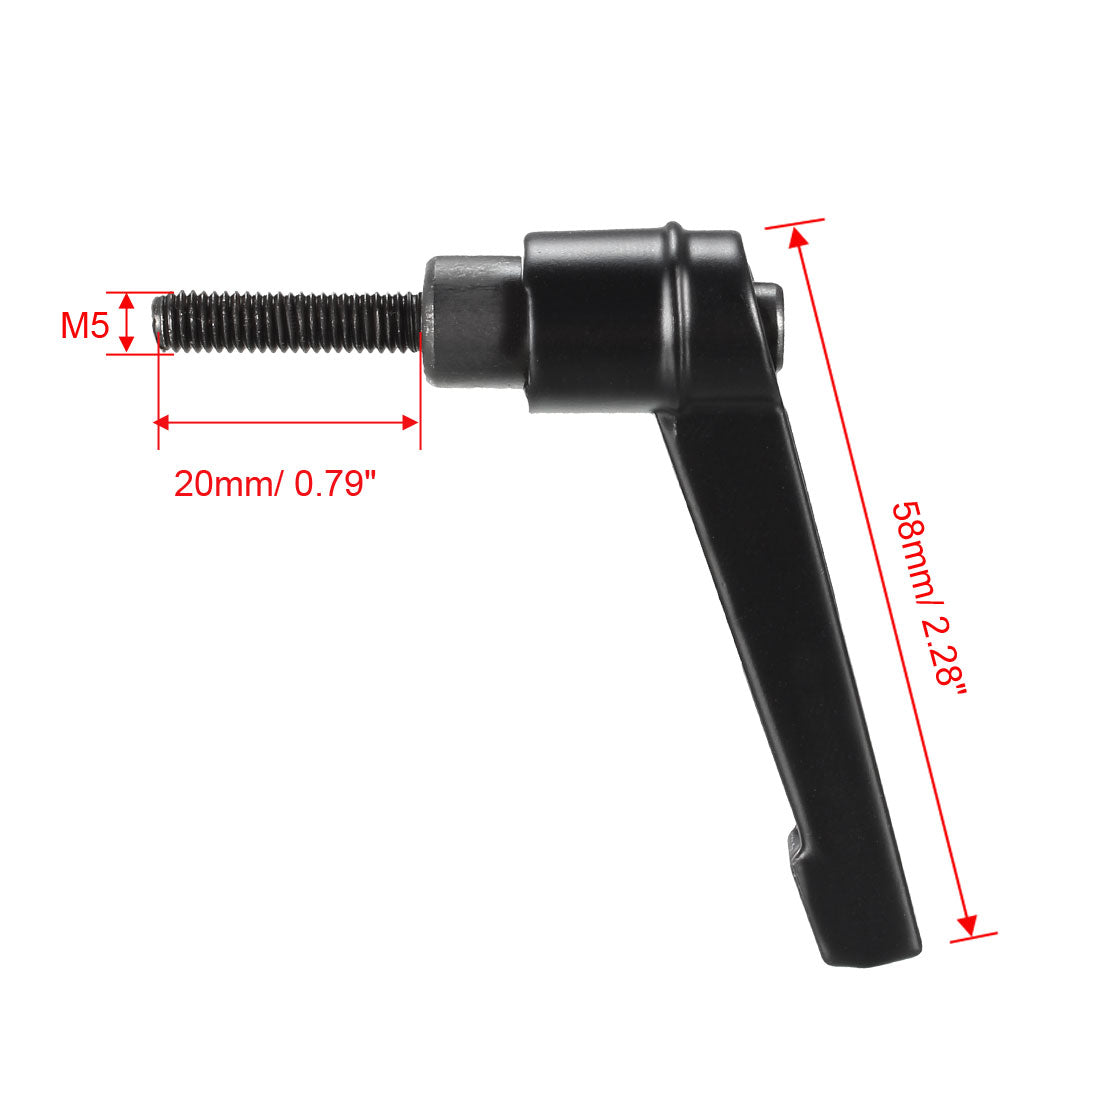 Uxcell Uxcell M6 x 16mm Handle Adjustable Clamping Lever Thread Push Button Ratchet Male Threaded Stud 5 Pcs